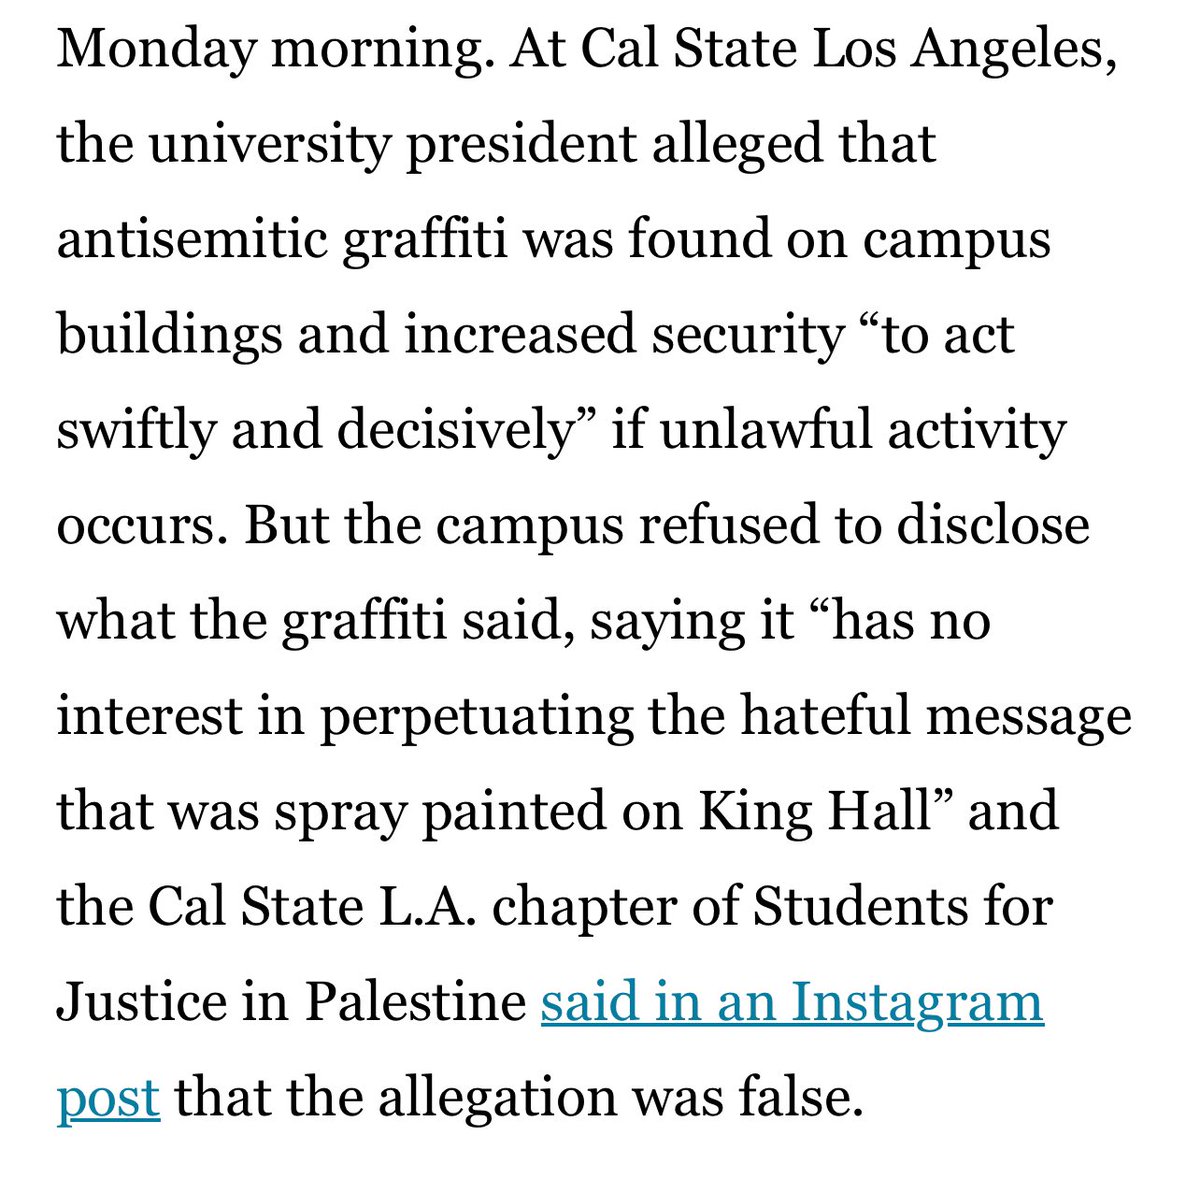 Surprise, surprise, Cal State LA was unable to provide any evidence about “antisemitic graffiti” on campus. It is safe to say that CSULA President Eanes lied about this in an attempt to criminalize the camp. Journalists, please, this is why it’s so important to ask for proof!